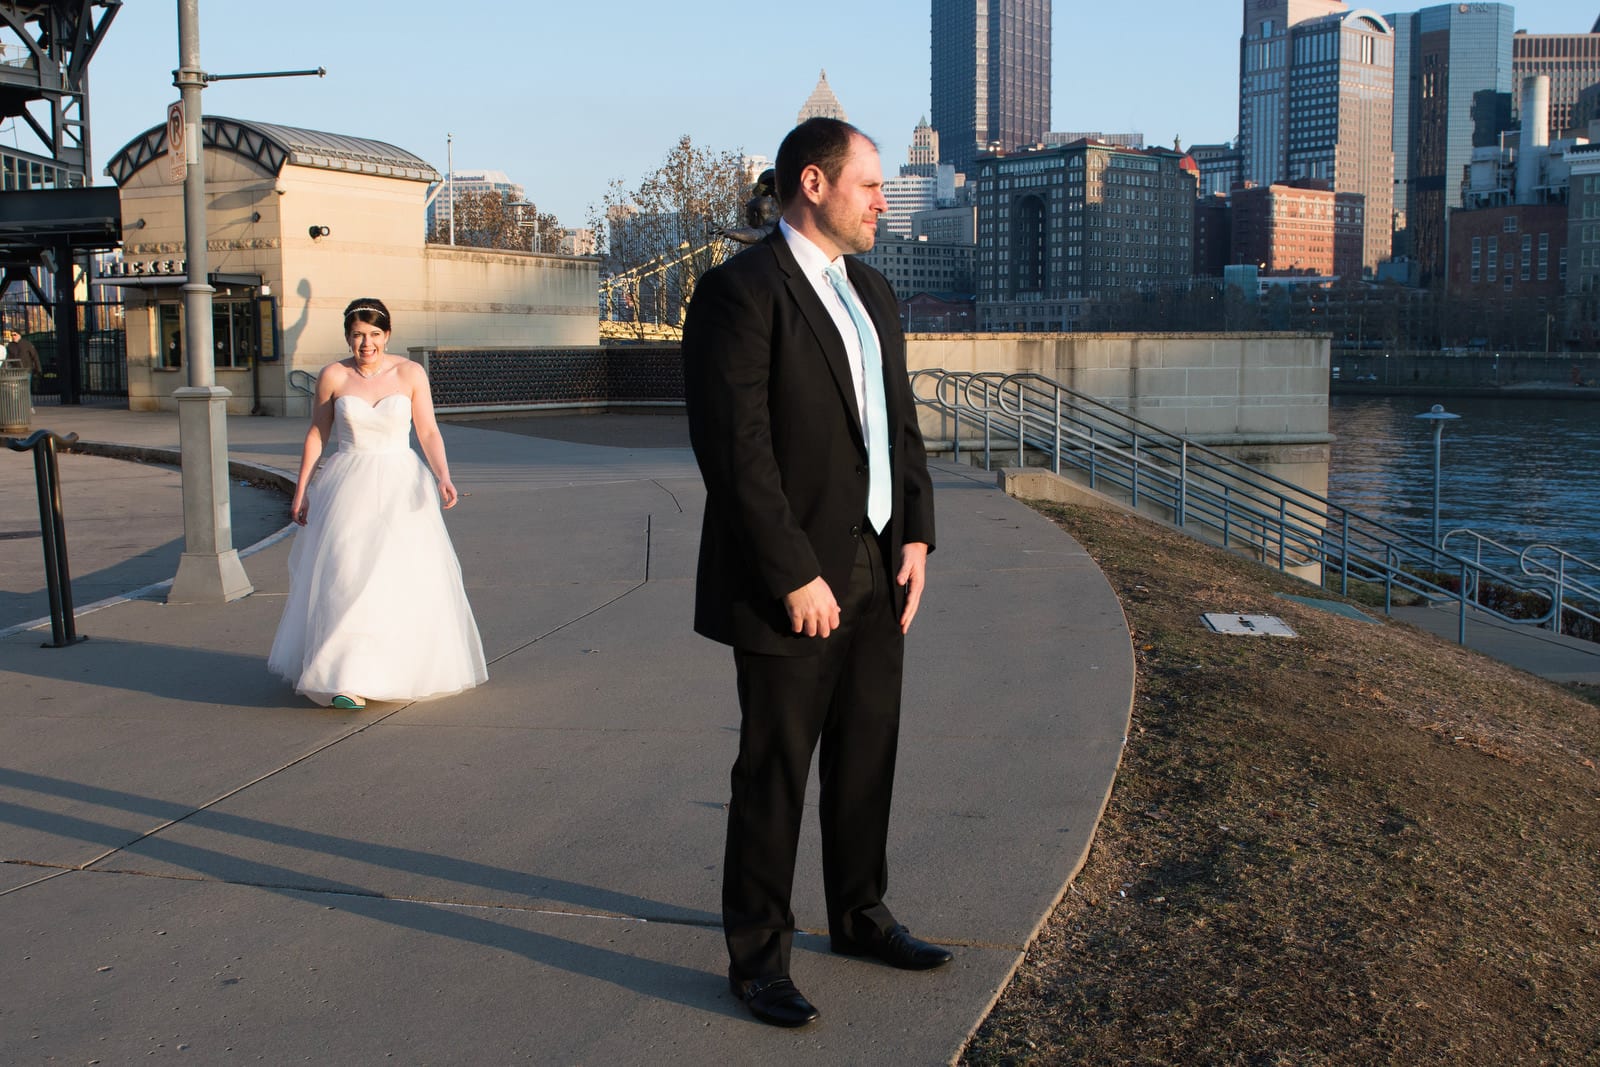 A bride approaches her groom as they have a first look on the north shore of the Allegheny River in Pittsburgh near PNC Park.